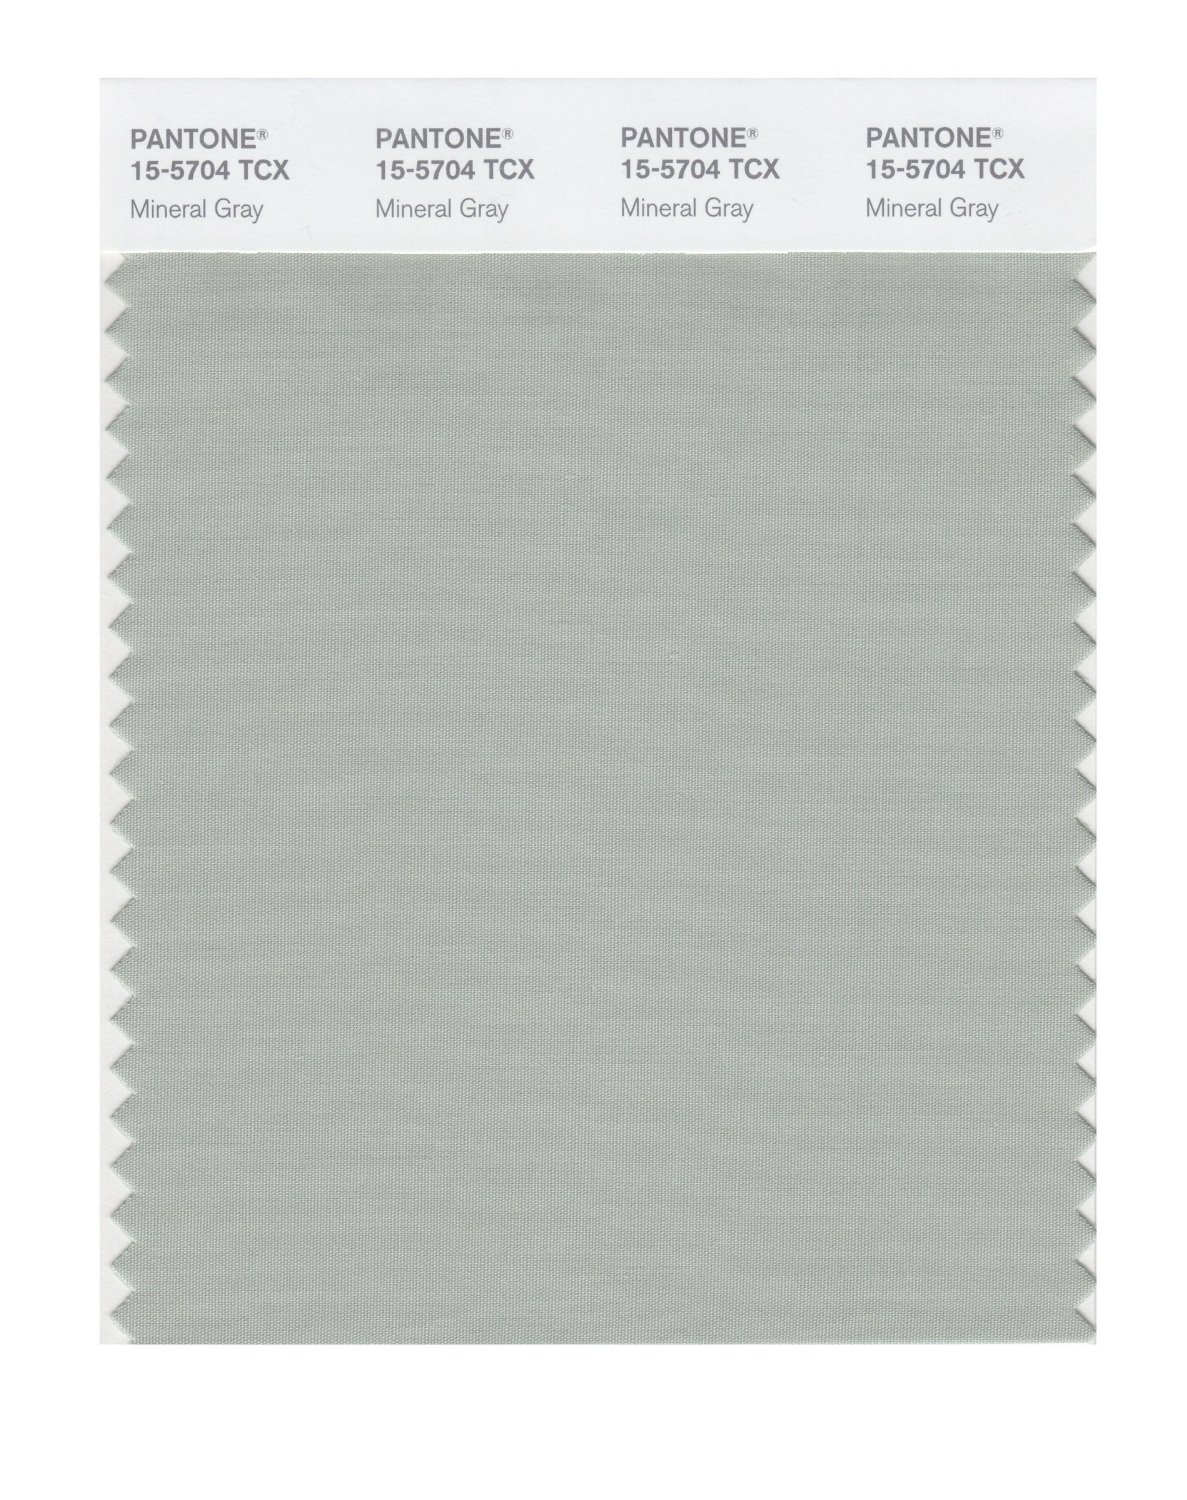 Pantone Cotton Swatch 15-5704 Mineral Gray